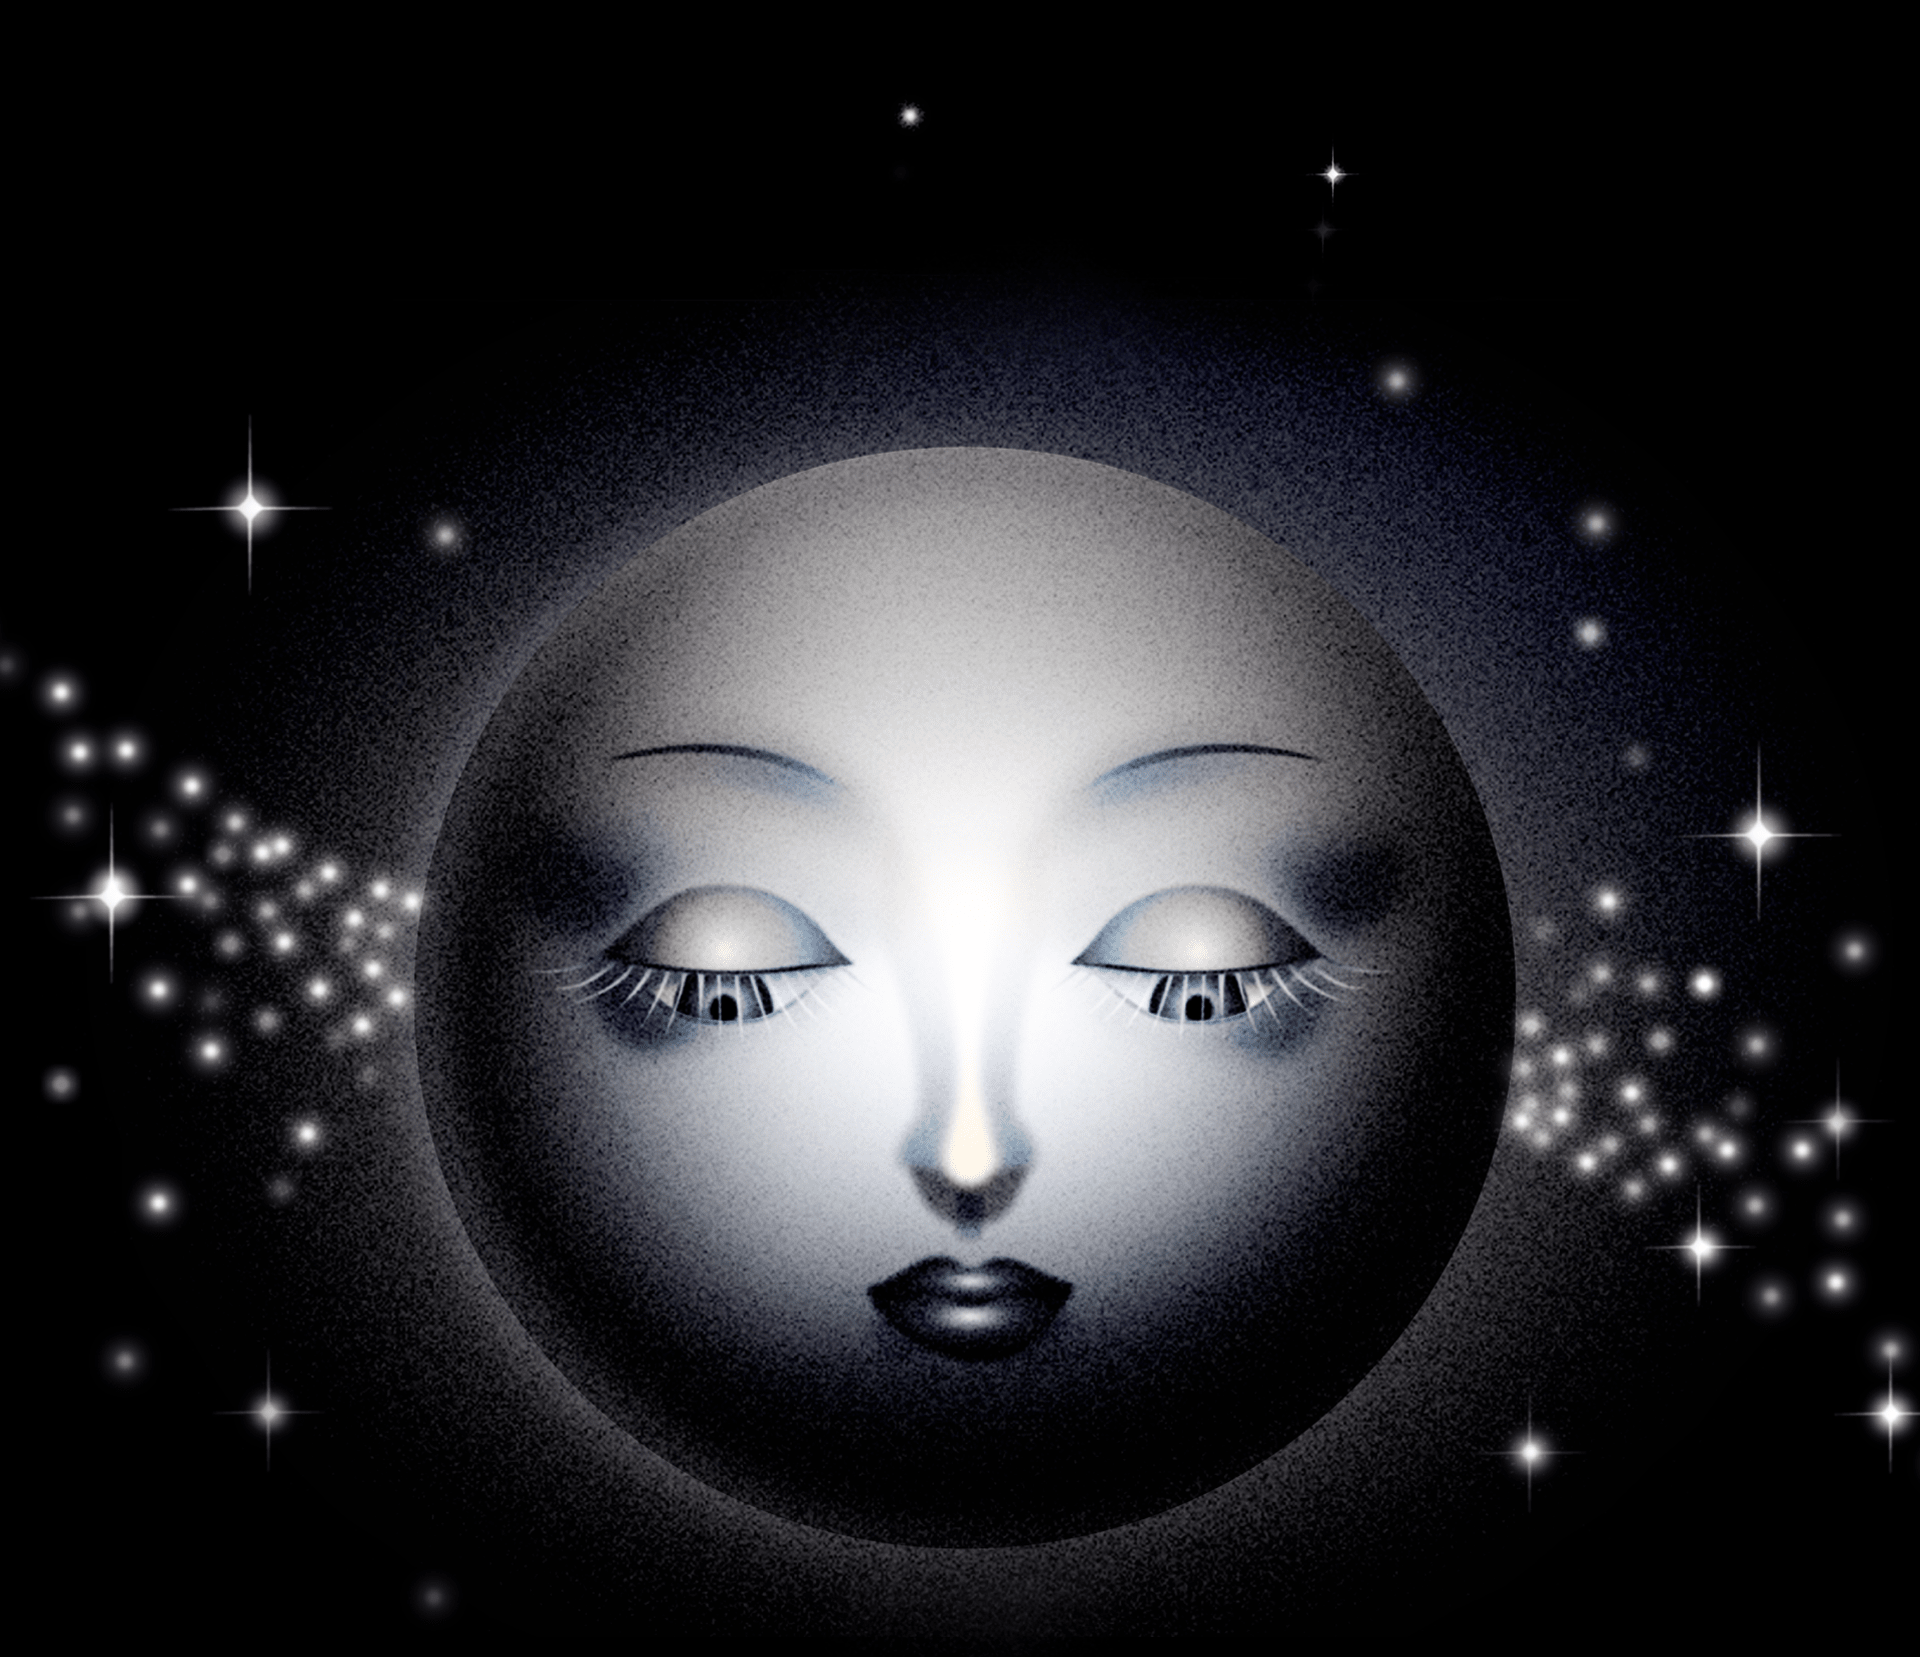 Black and white image of a sphere with a feminine face, floating on a background dotted with stars.